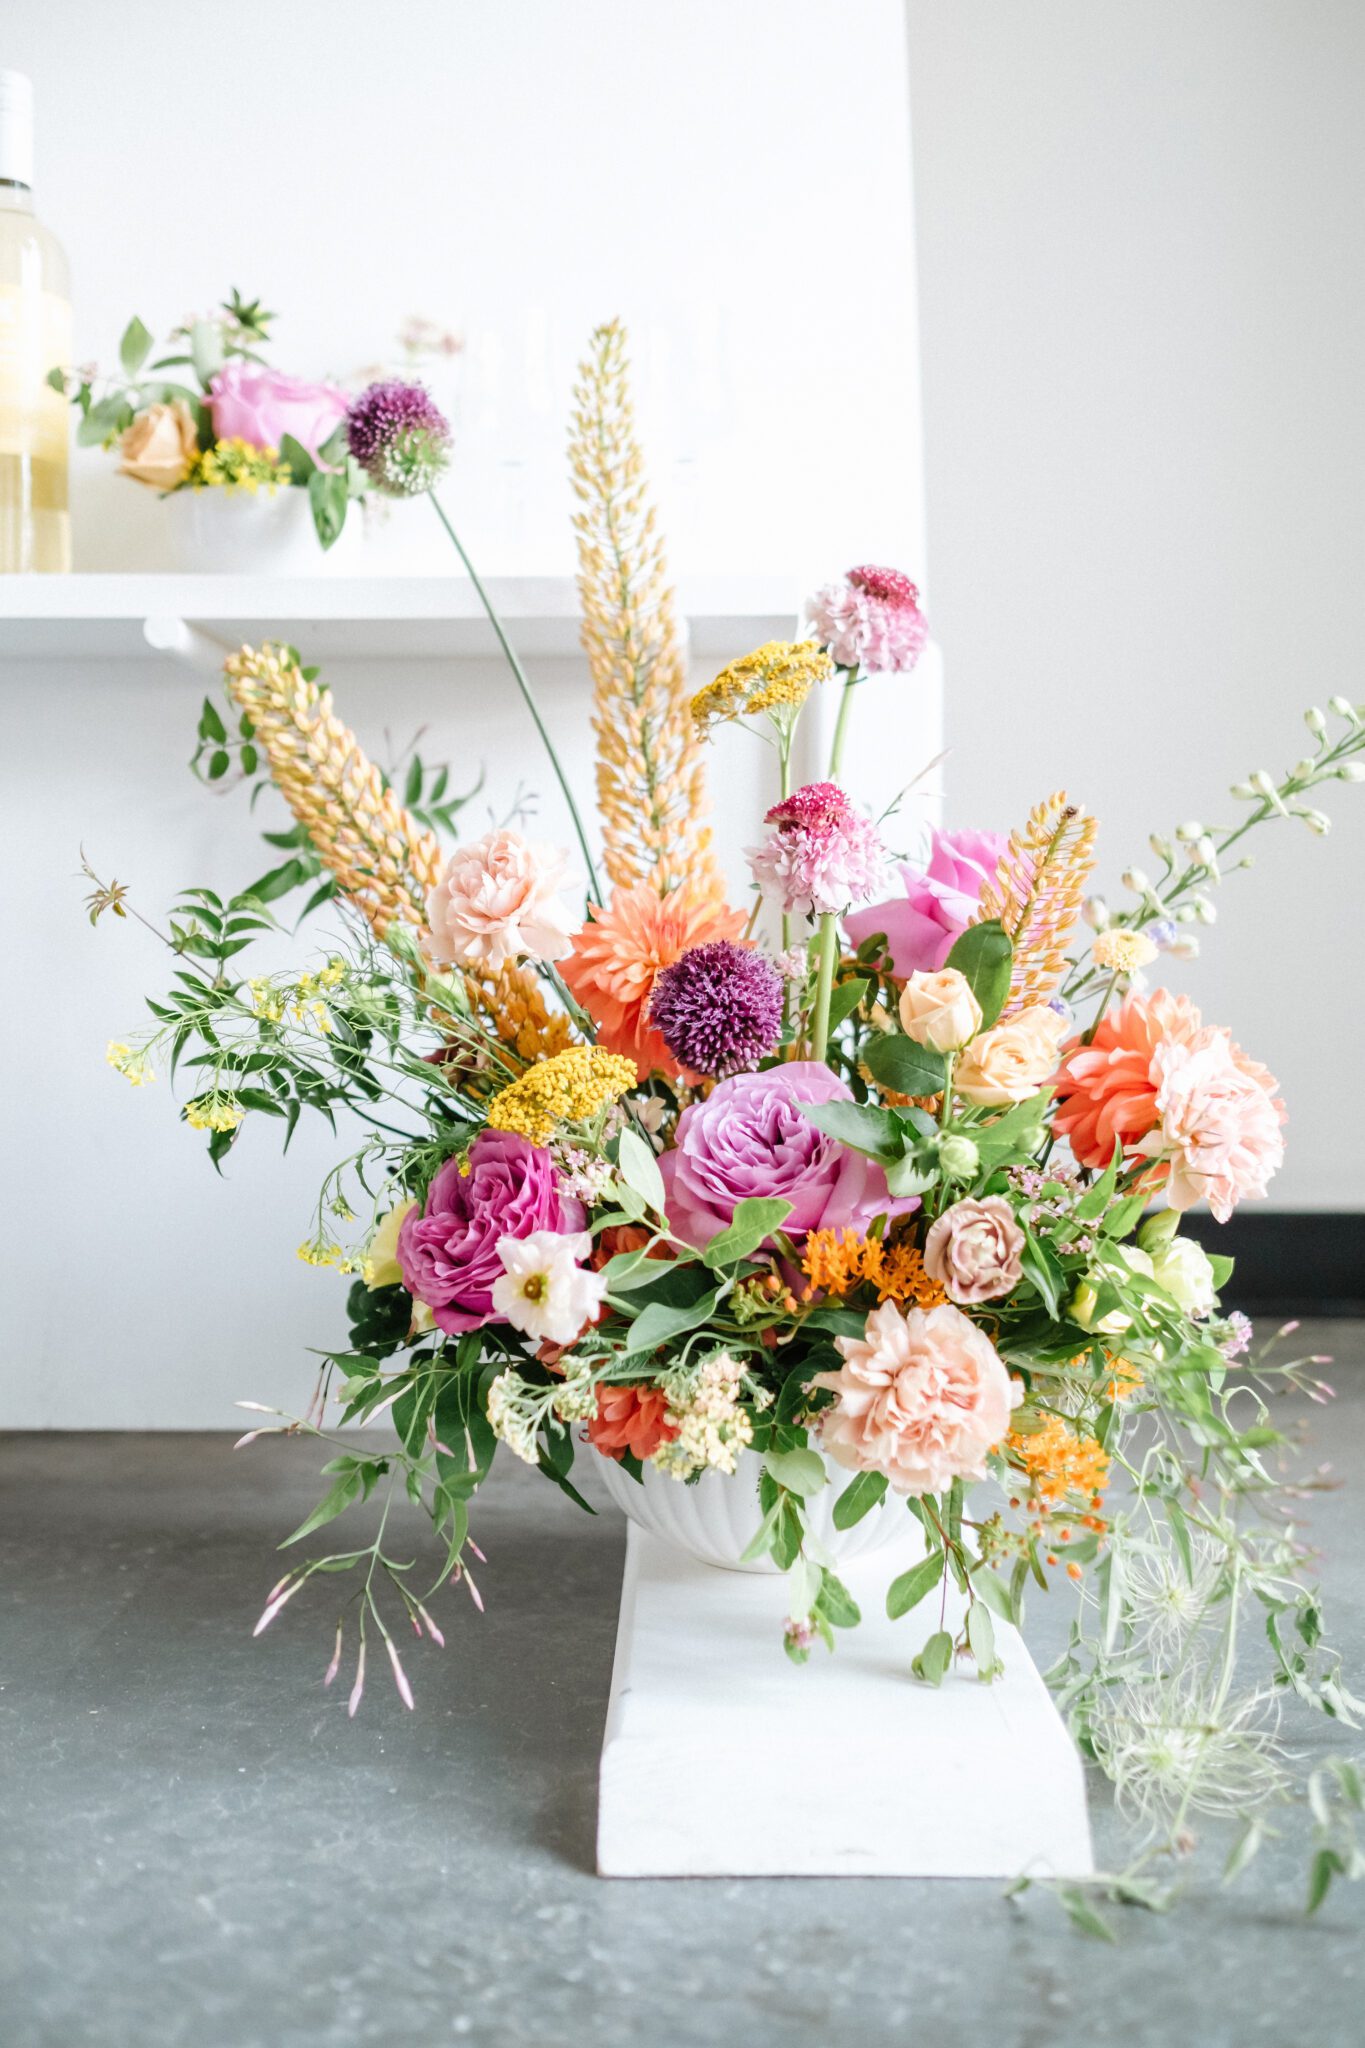 Bright & colourful wedding florals by Meadow & Vine. Retro-inspired vibrant colour palette of purple, orange, yellow, peach, tangerine and coral.